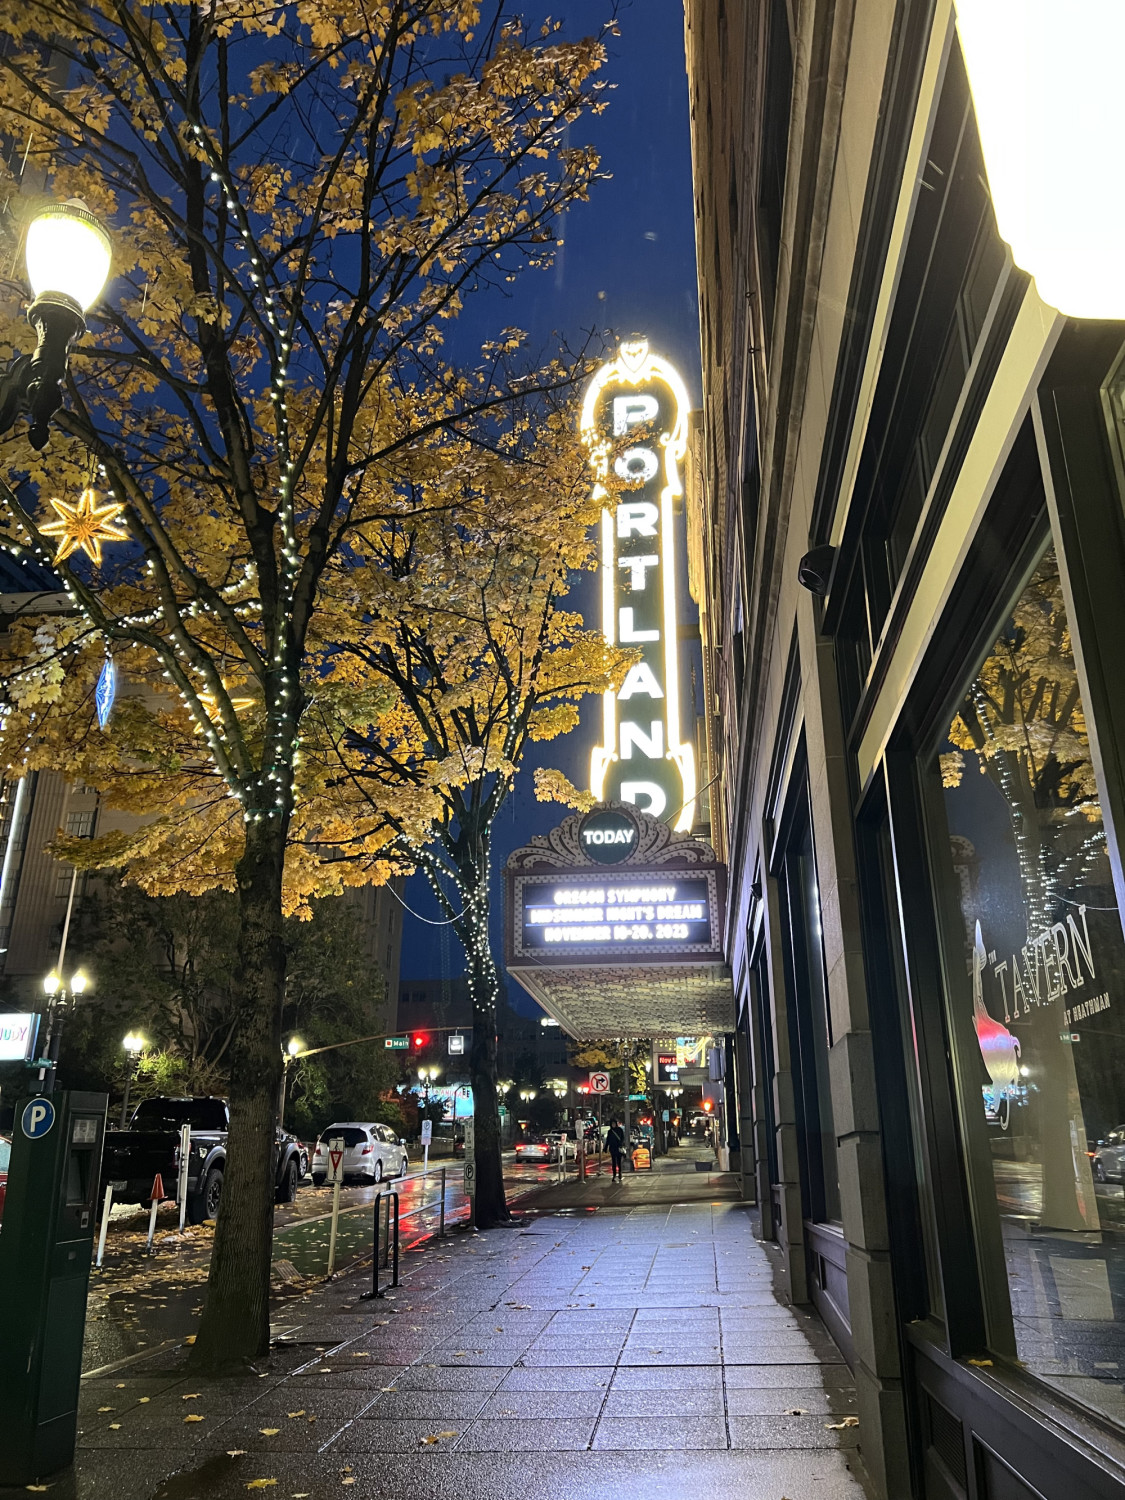 A view of a theatre sign that says Portland it lit up gold lettering next to a city sidewalk and trees. 